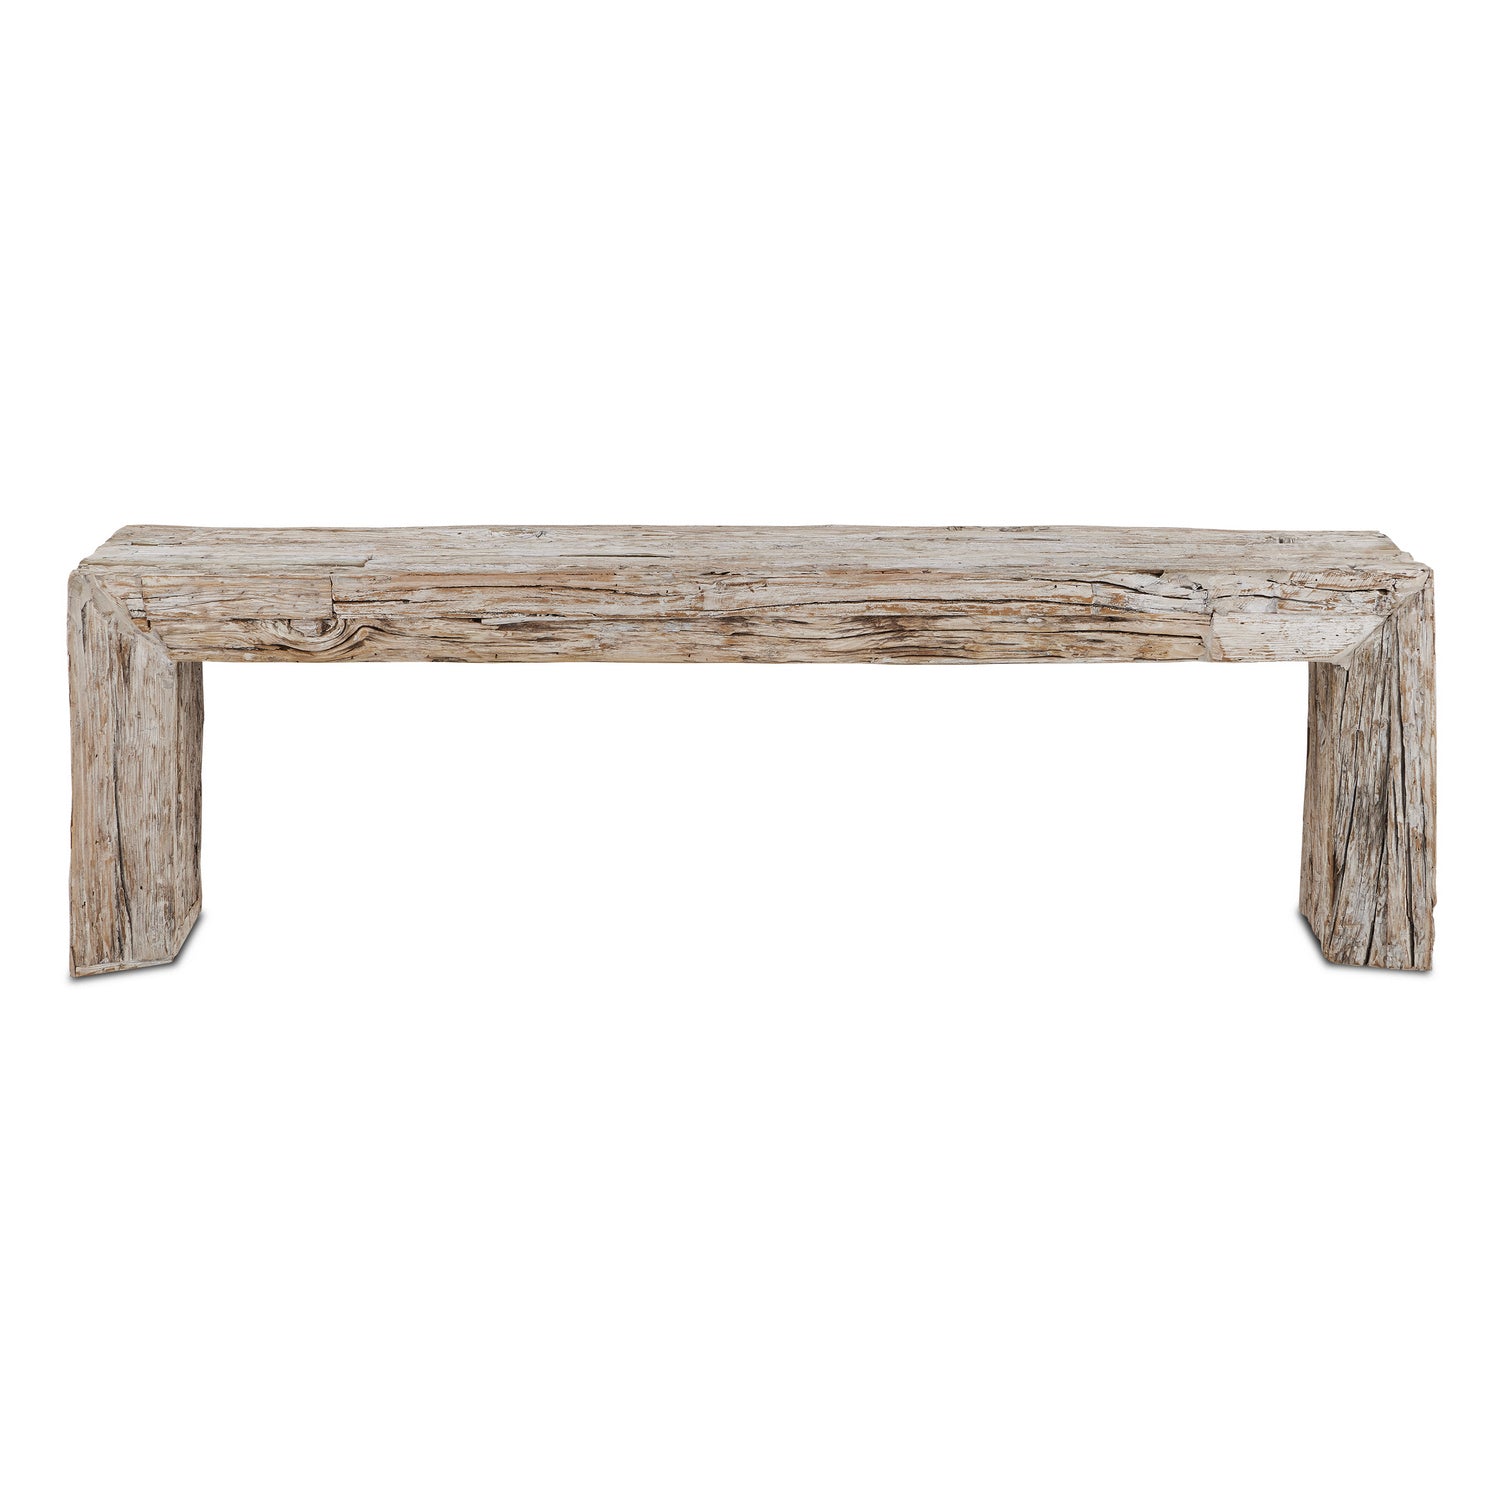 Bench from the Kanor collection in Whitewash finish